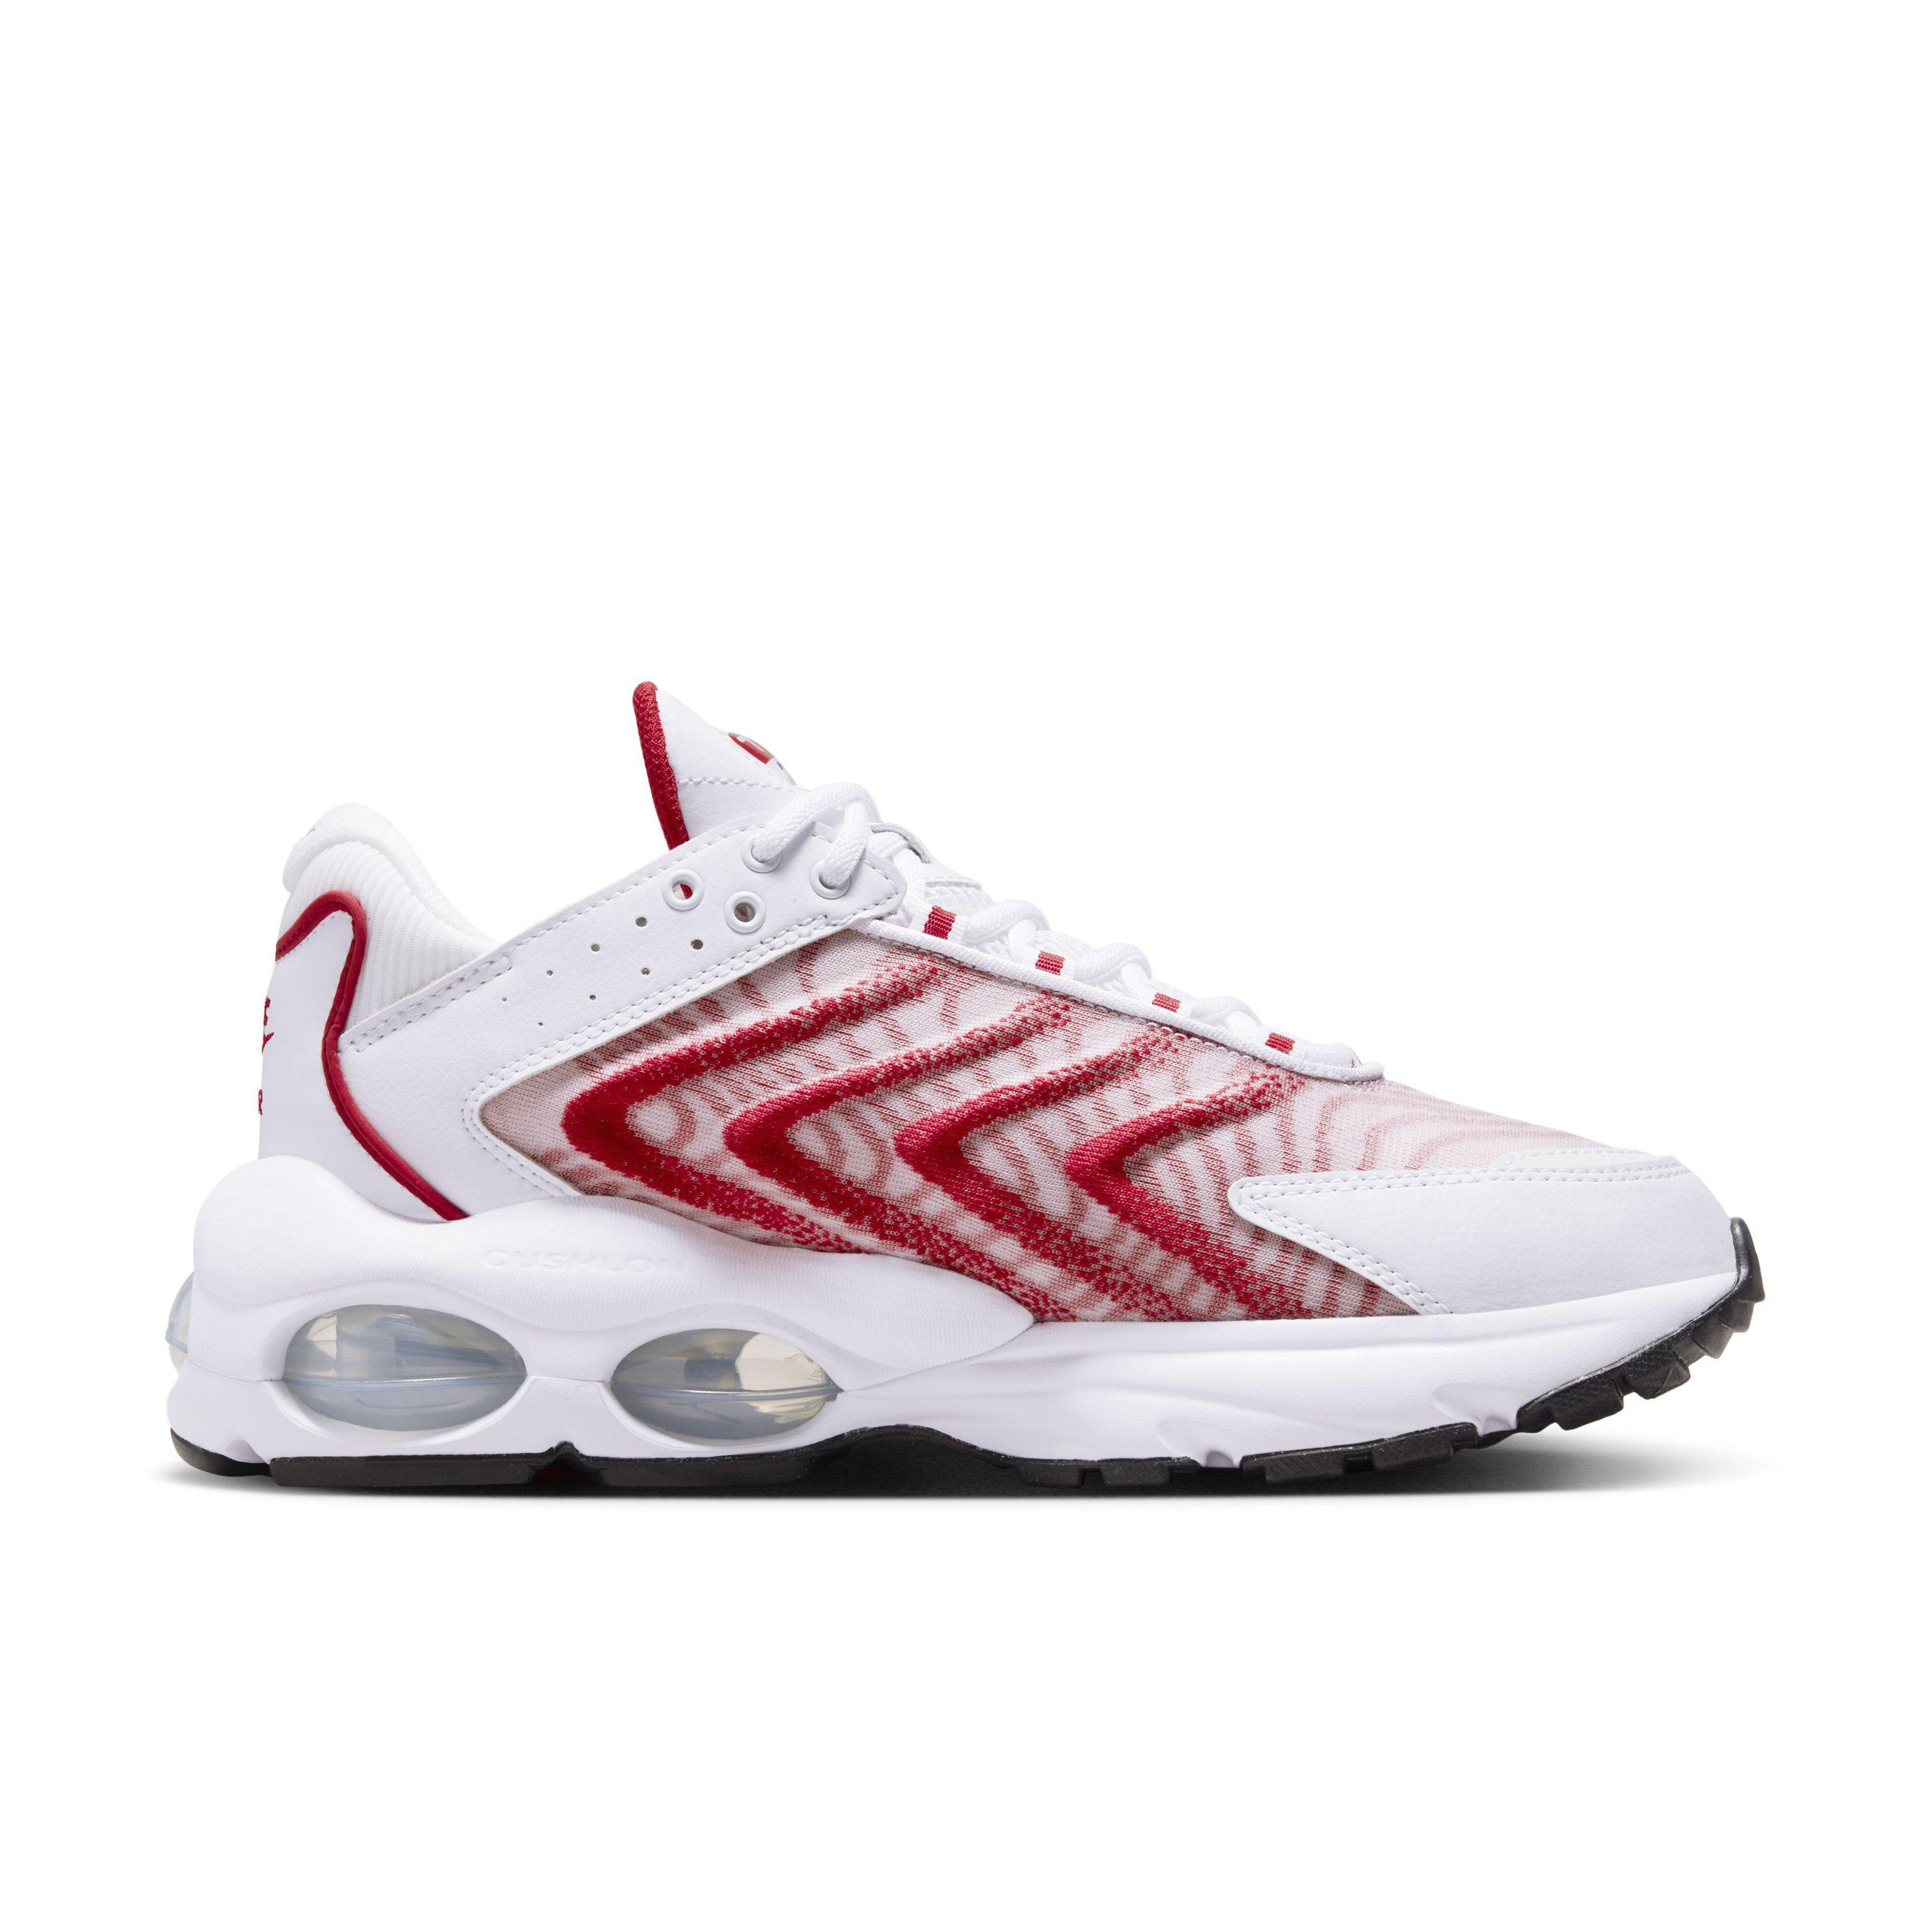 Nike Men's Air Max tw Shoes, White/Red/Black